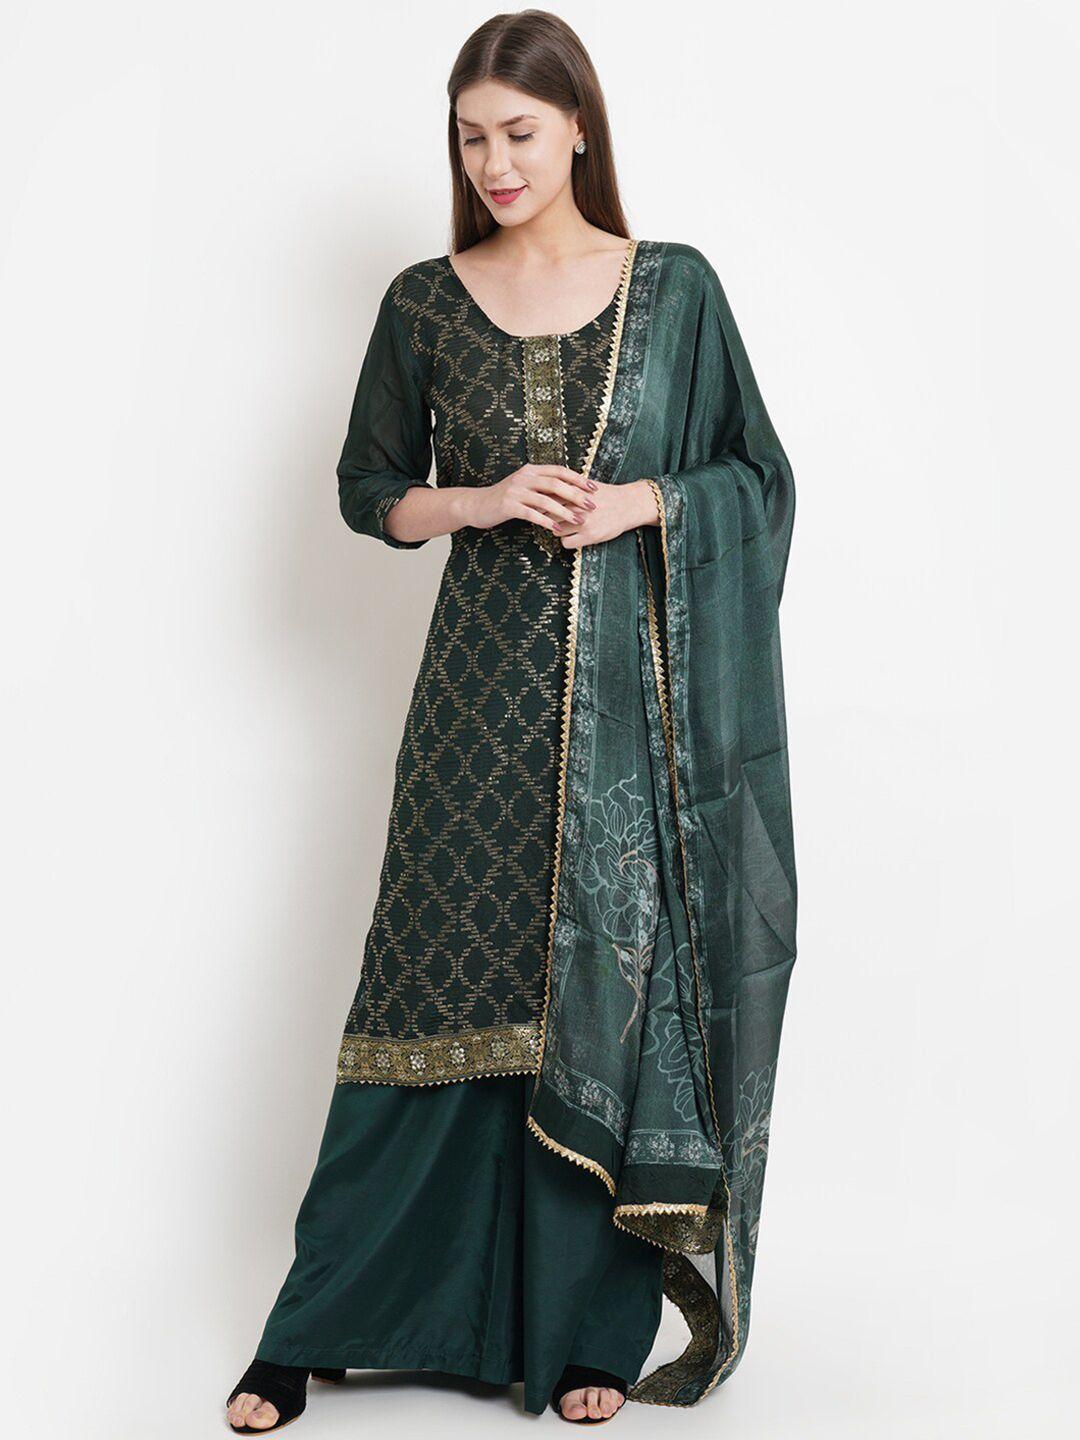 stylee-lifestyle-women-green-embellished-unstitched-dress-material